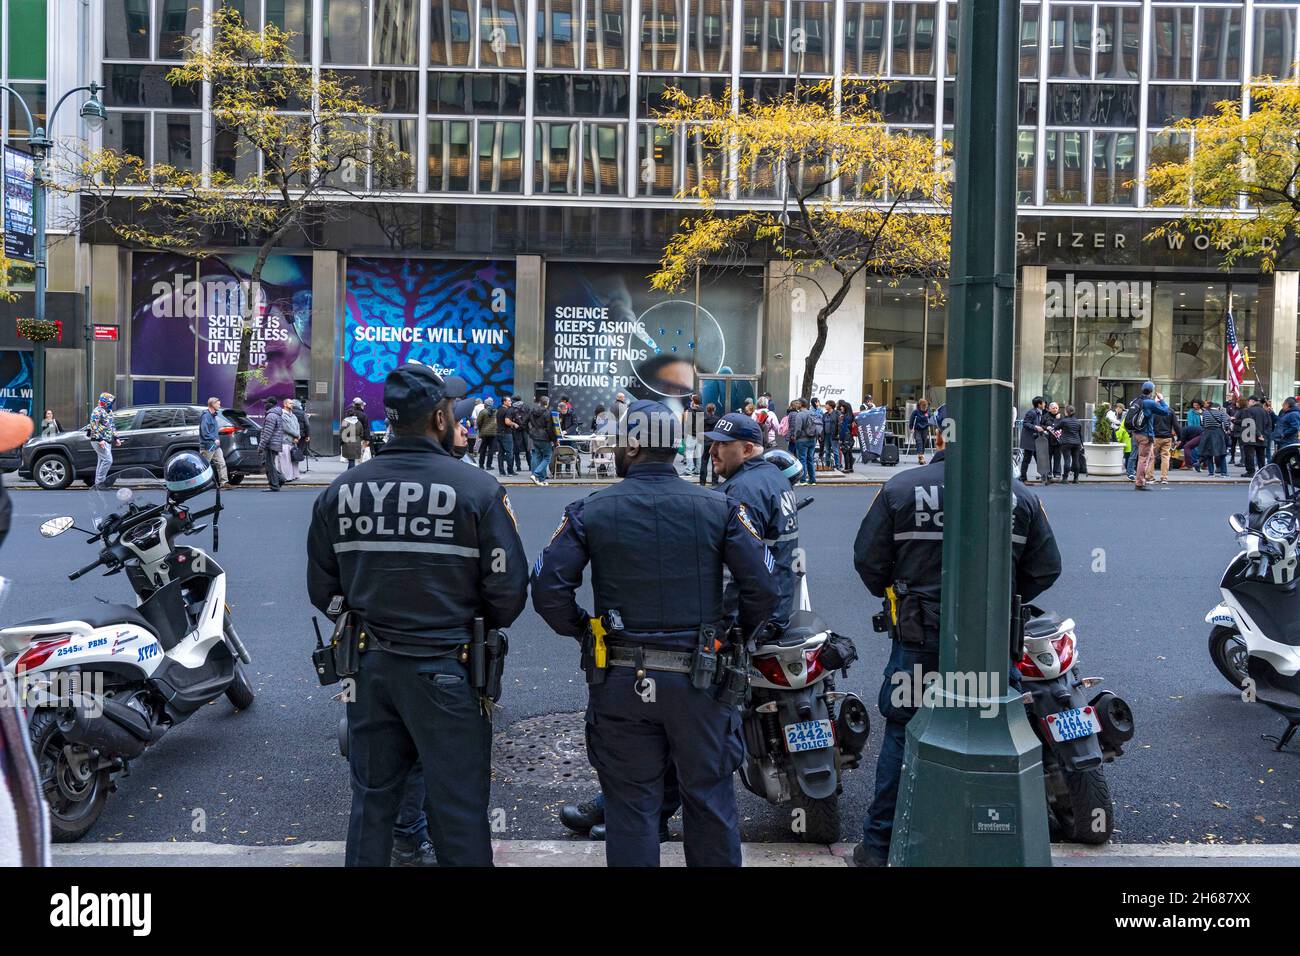 New York, United States. 13th Nov, 2021. NEW YORK, NY - NOVEMBER 13: New York Police Department (NYPD) officers stand by as two anti-vaccine protests take place in front of Pfizer world headquarters on November 13, 2021 in New York City. A U.S. Circuit Court granted an emergency stay to temporarily stop the Biden administration's vaccine requirement for businesses with 100 or more workers as many feel it is an unlawful overreach. Credit: Ron Adar/Alamy Live News Stock Photo